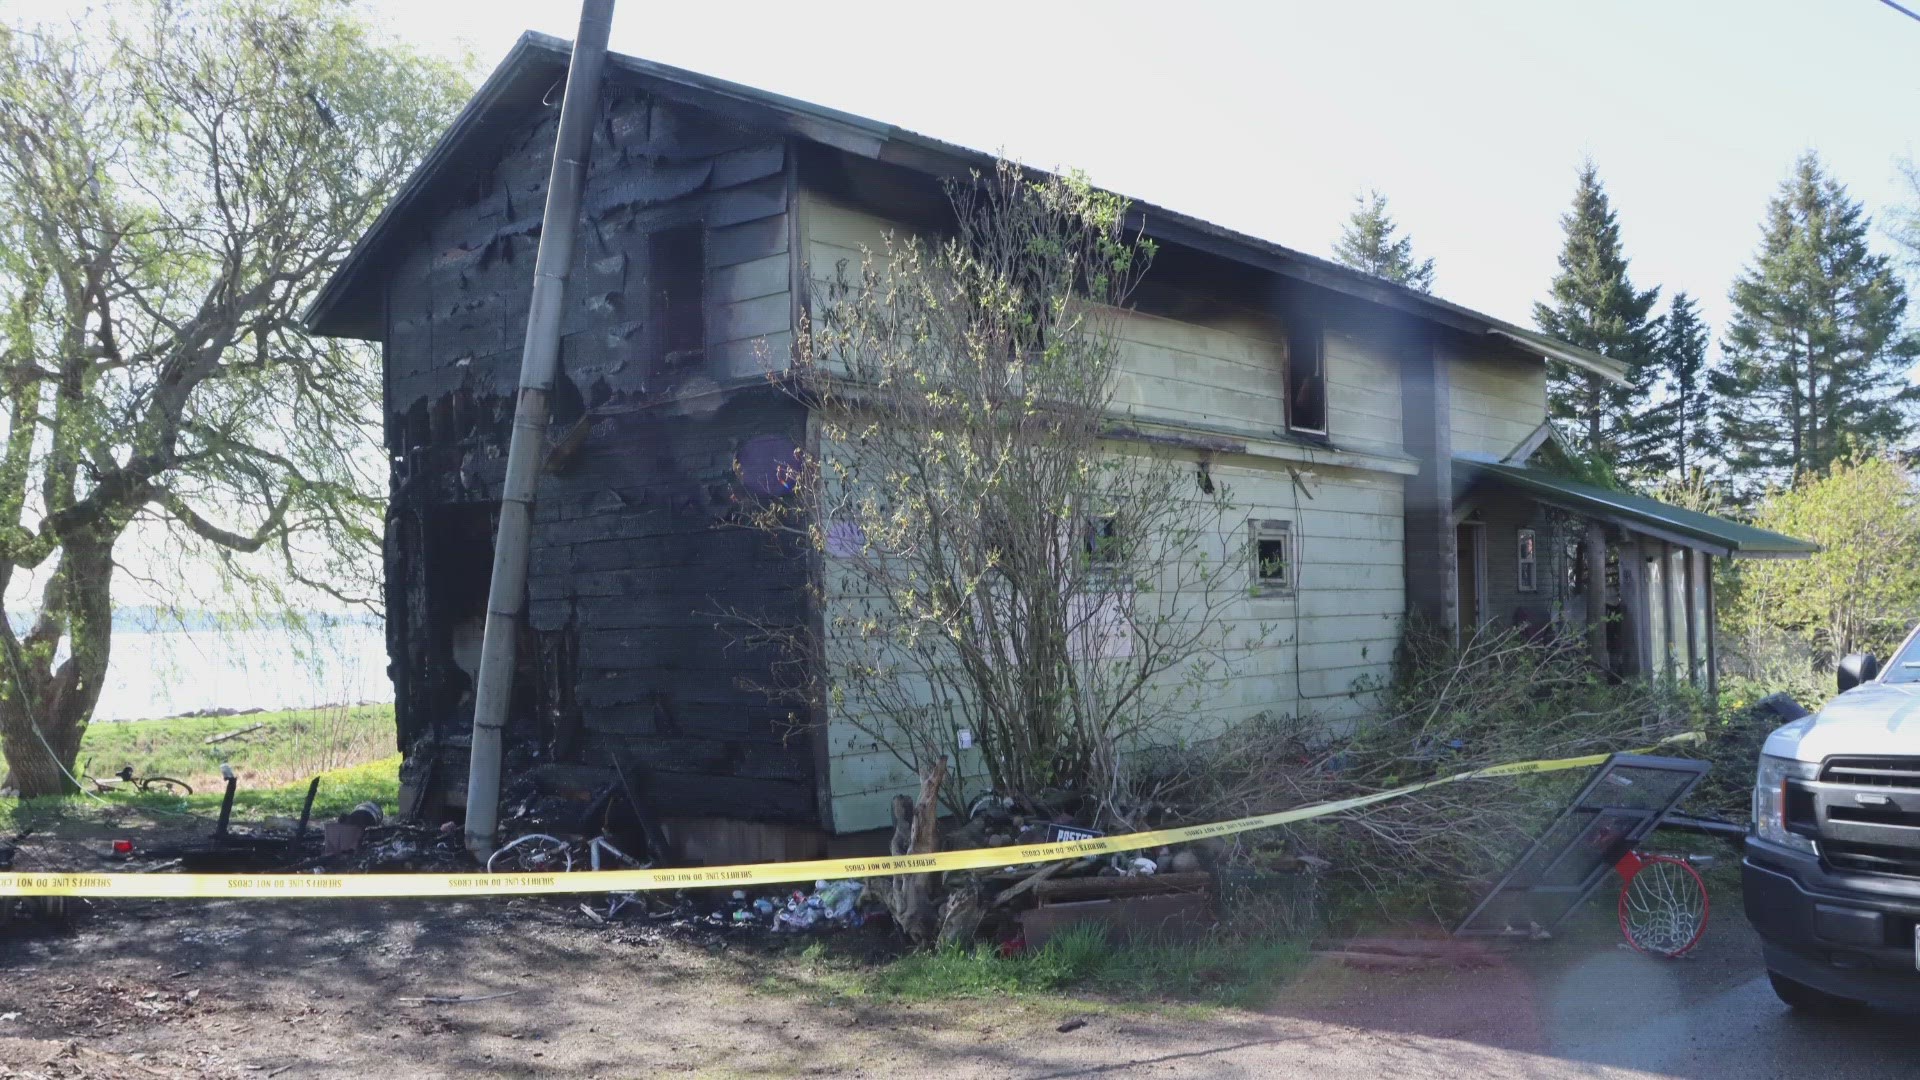 "The homeowner woke to the glow of a fire outside and along with the other family member was able to escape the fire with no injuries," officials said.